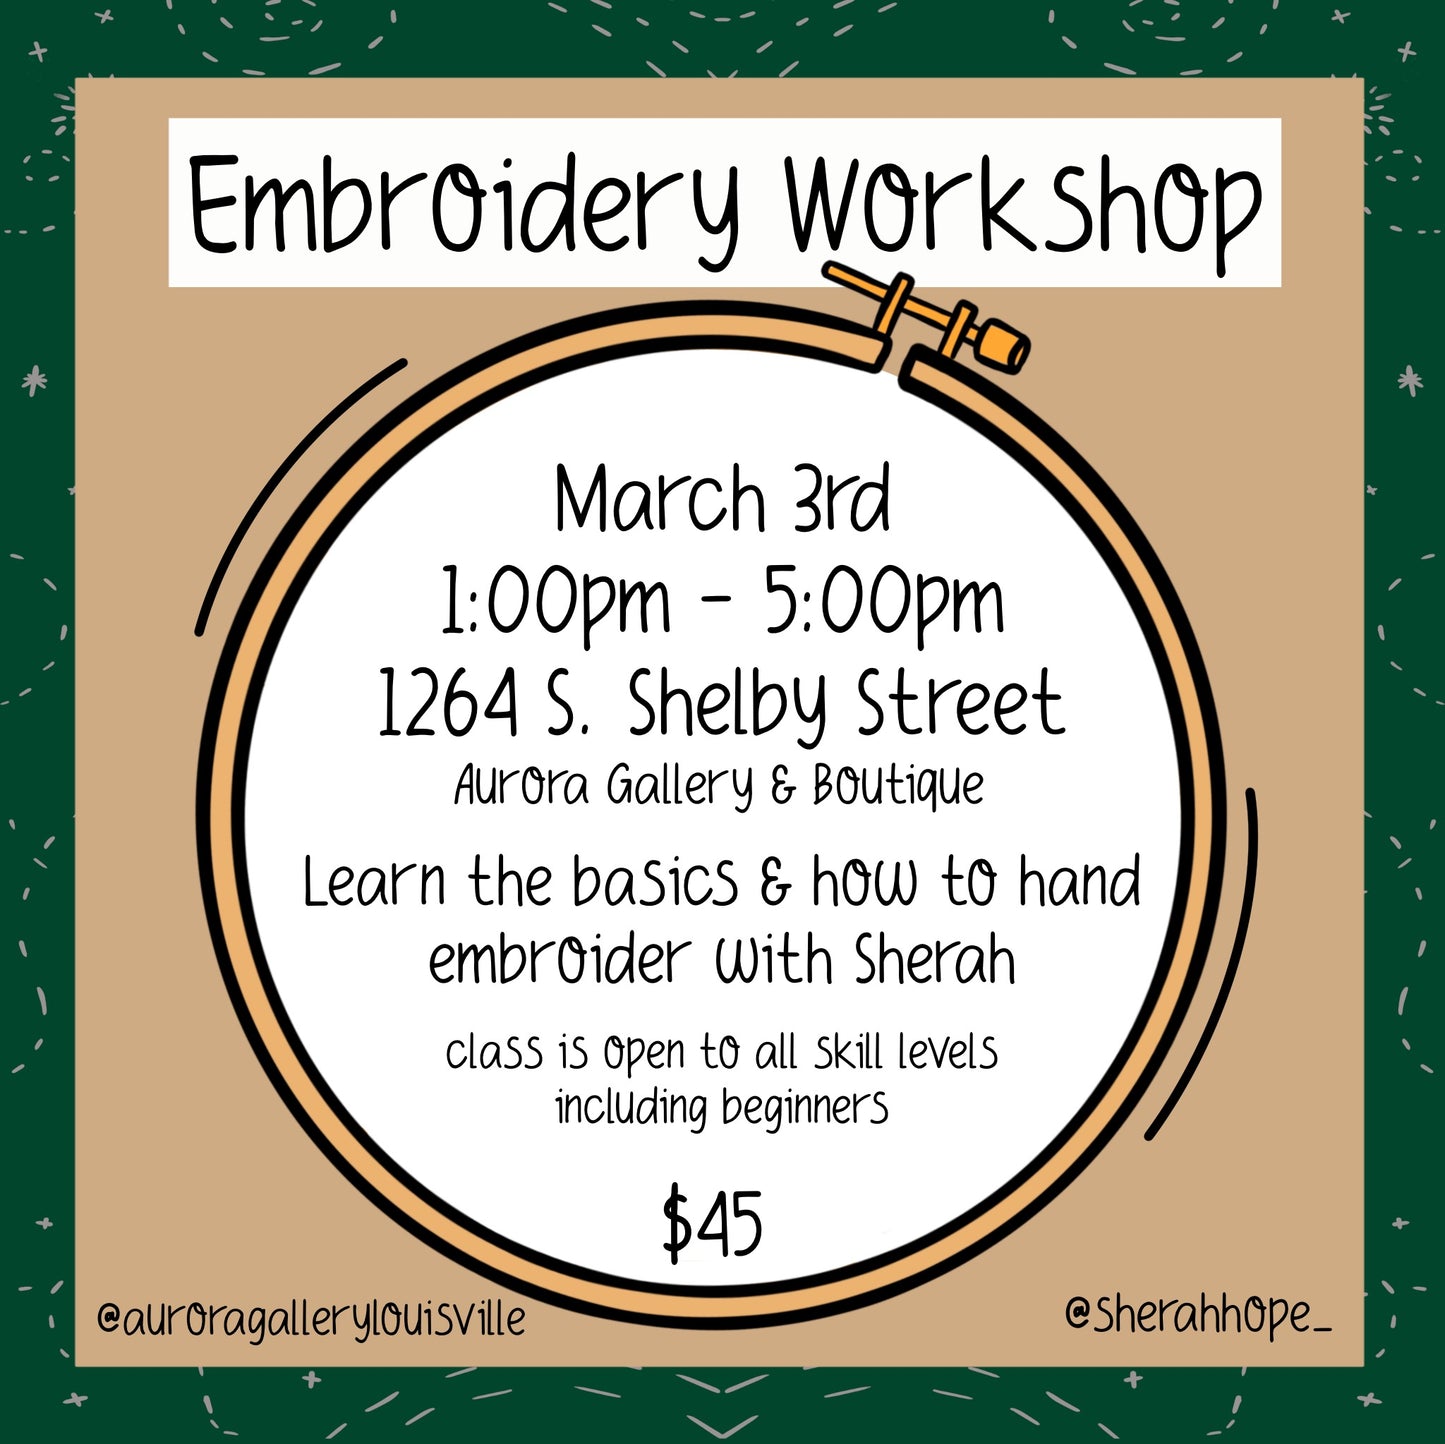 Embroidery Class taught by Sherah Hope